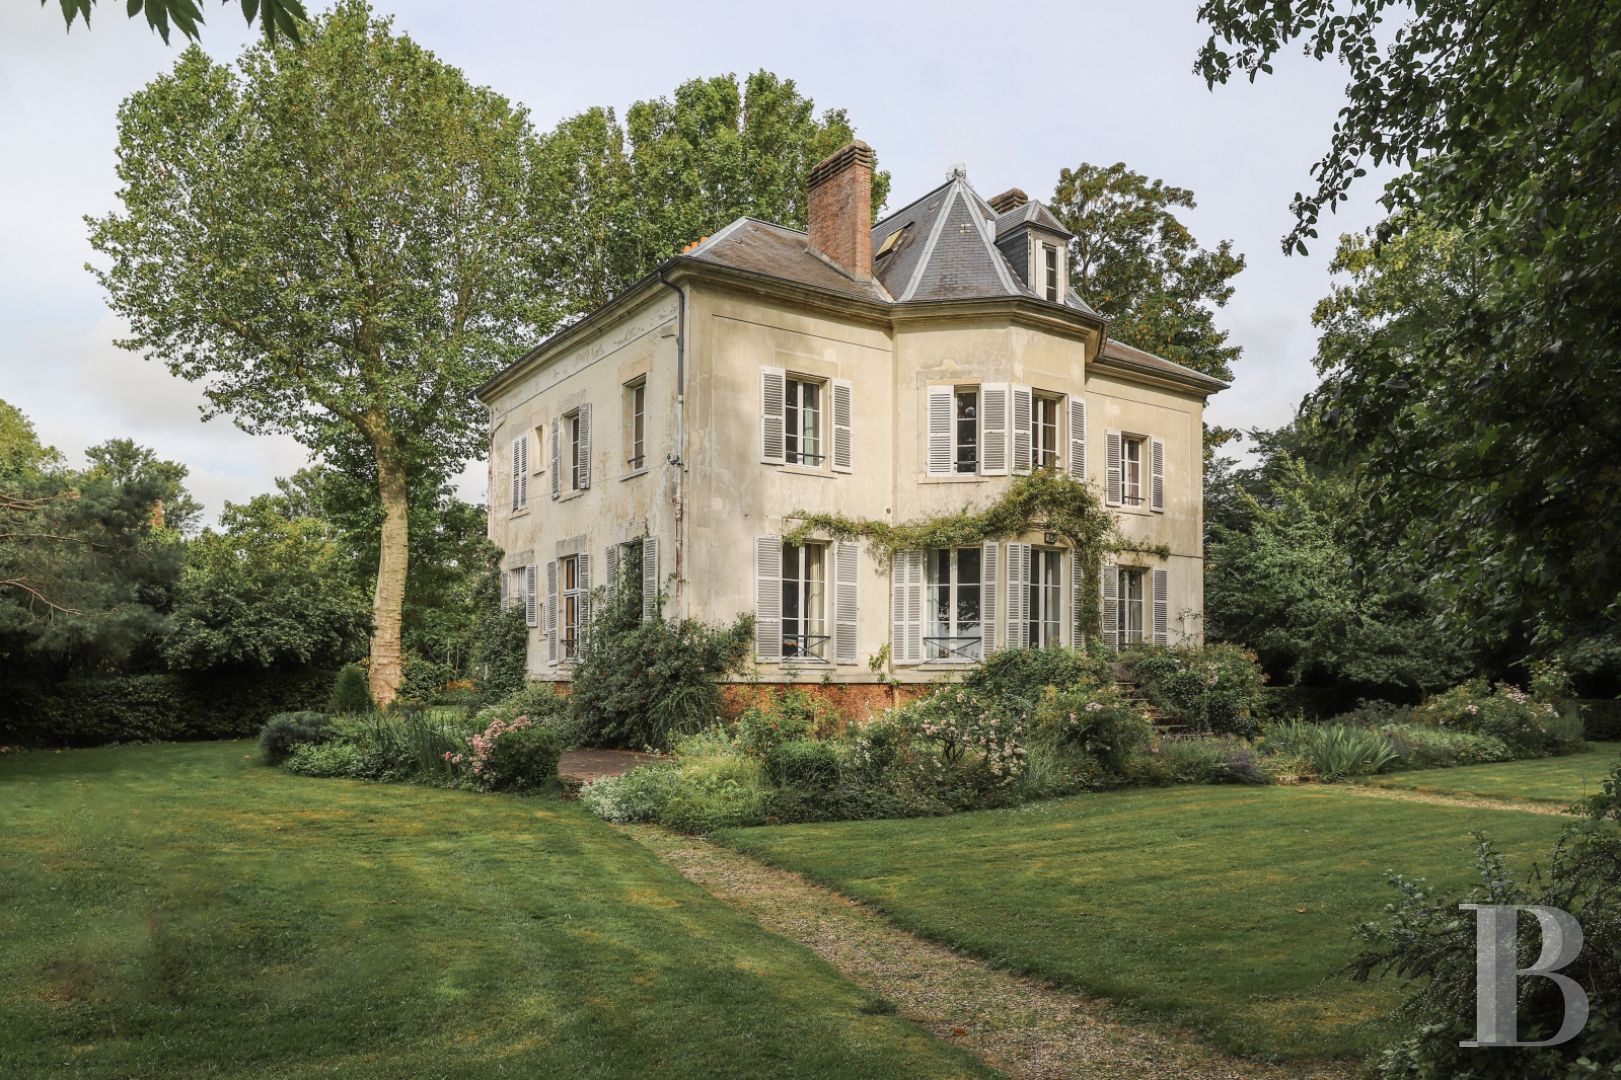 Let's Window Shop for French Fairytale Homes